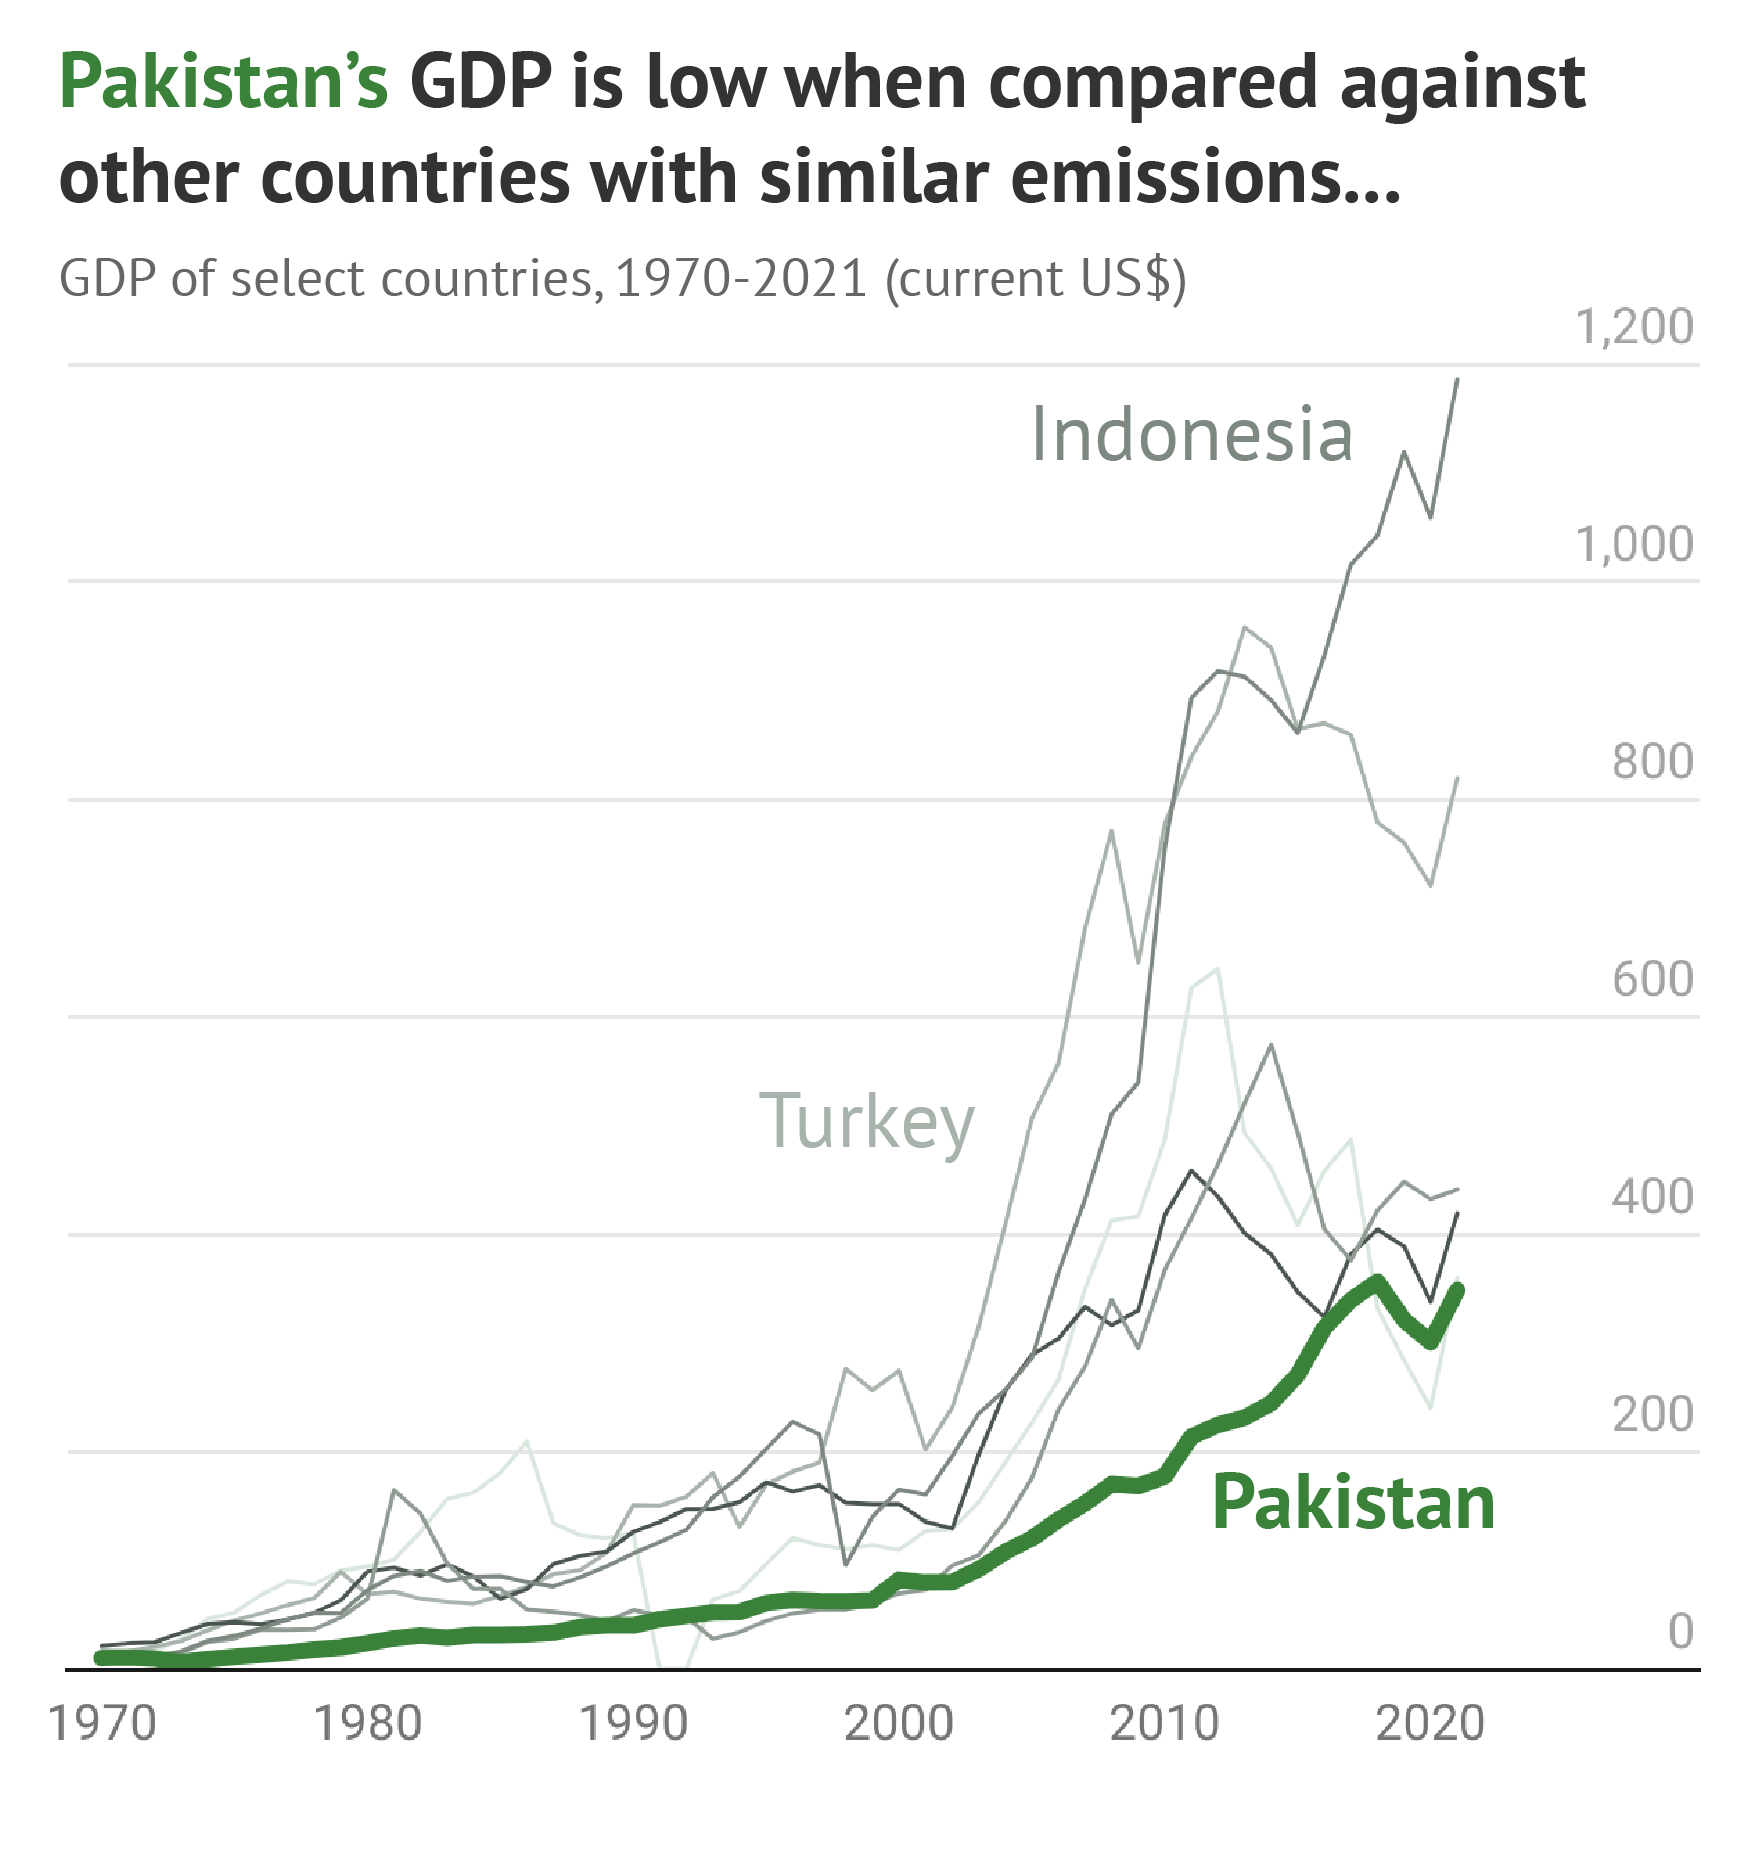 Chart showing that Pakistan's GDP is low when compared against other countires with similar emissions.